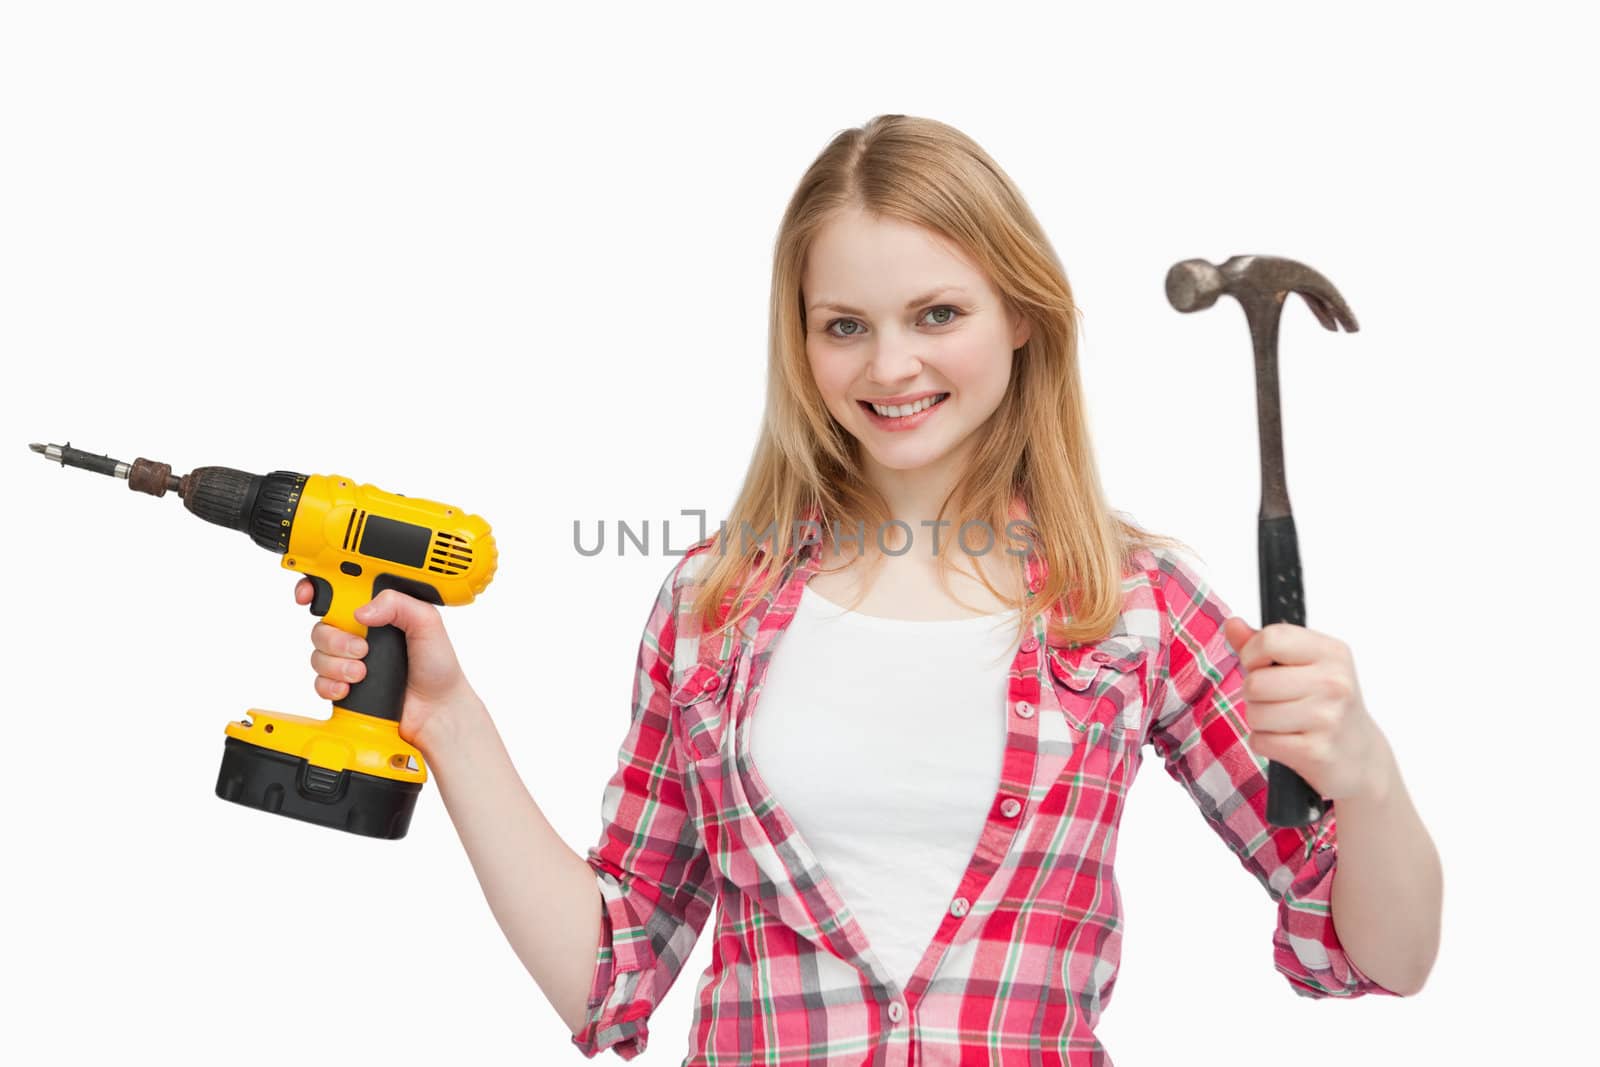 Smiling woman holding tools against white background